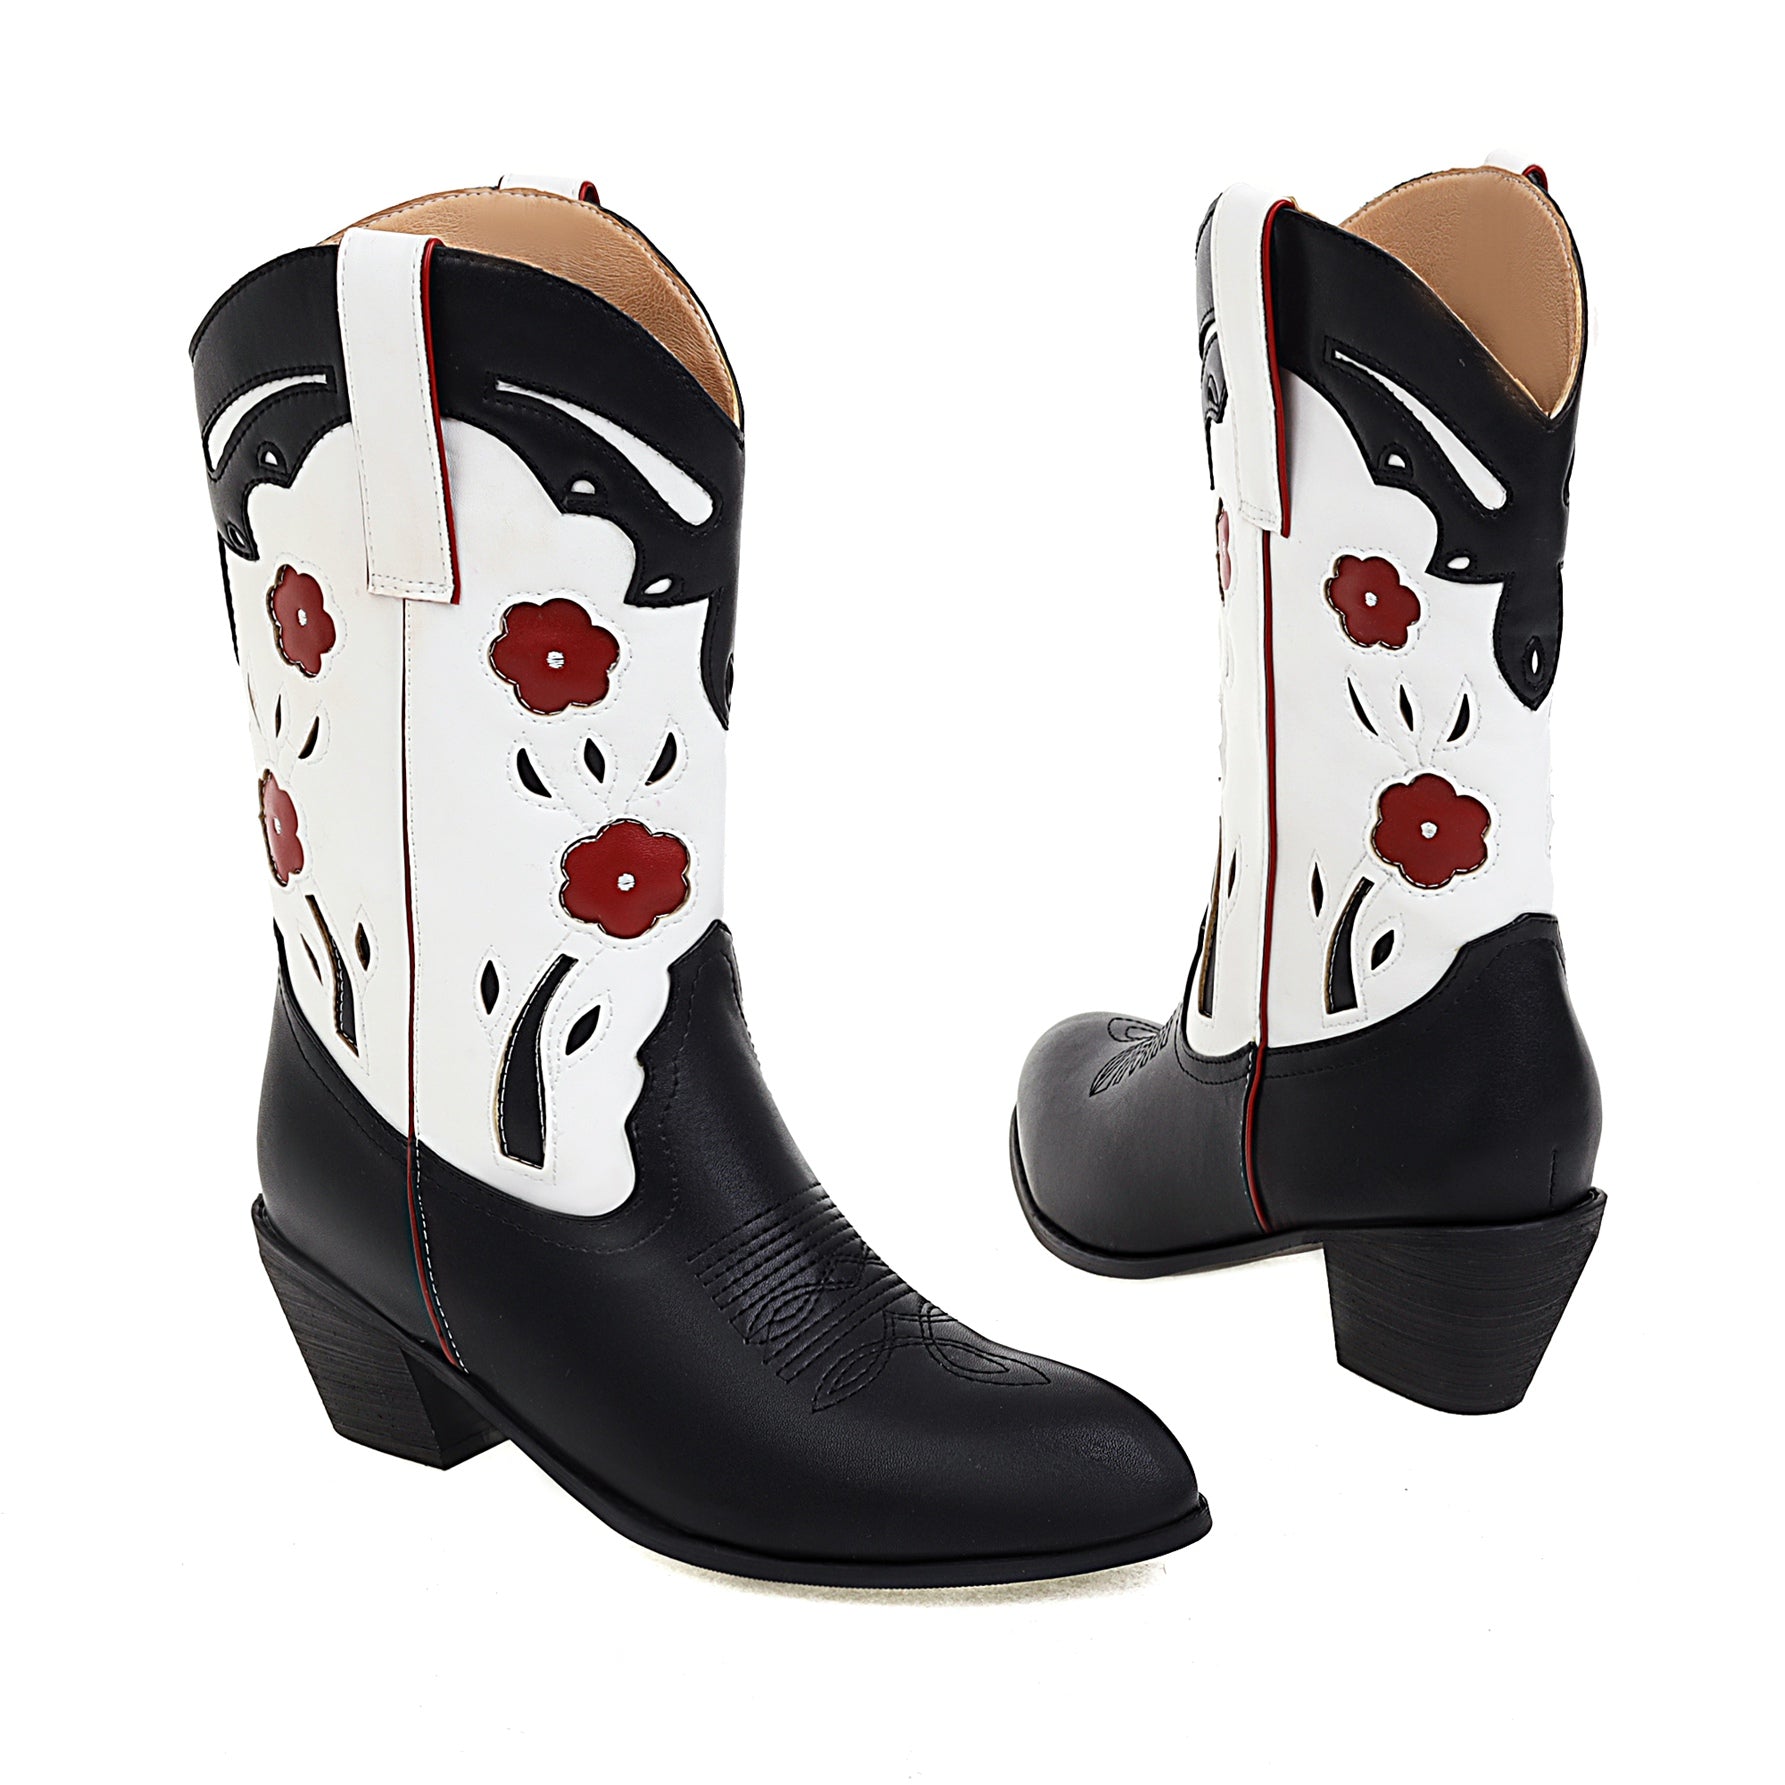 Bigsizeheels Western vintage fall embroidery boots - White freeshipping - bigsizeheel®-size5-size15 -All Plus Sizes Available!